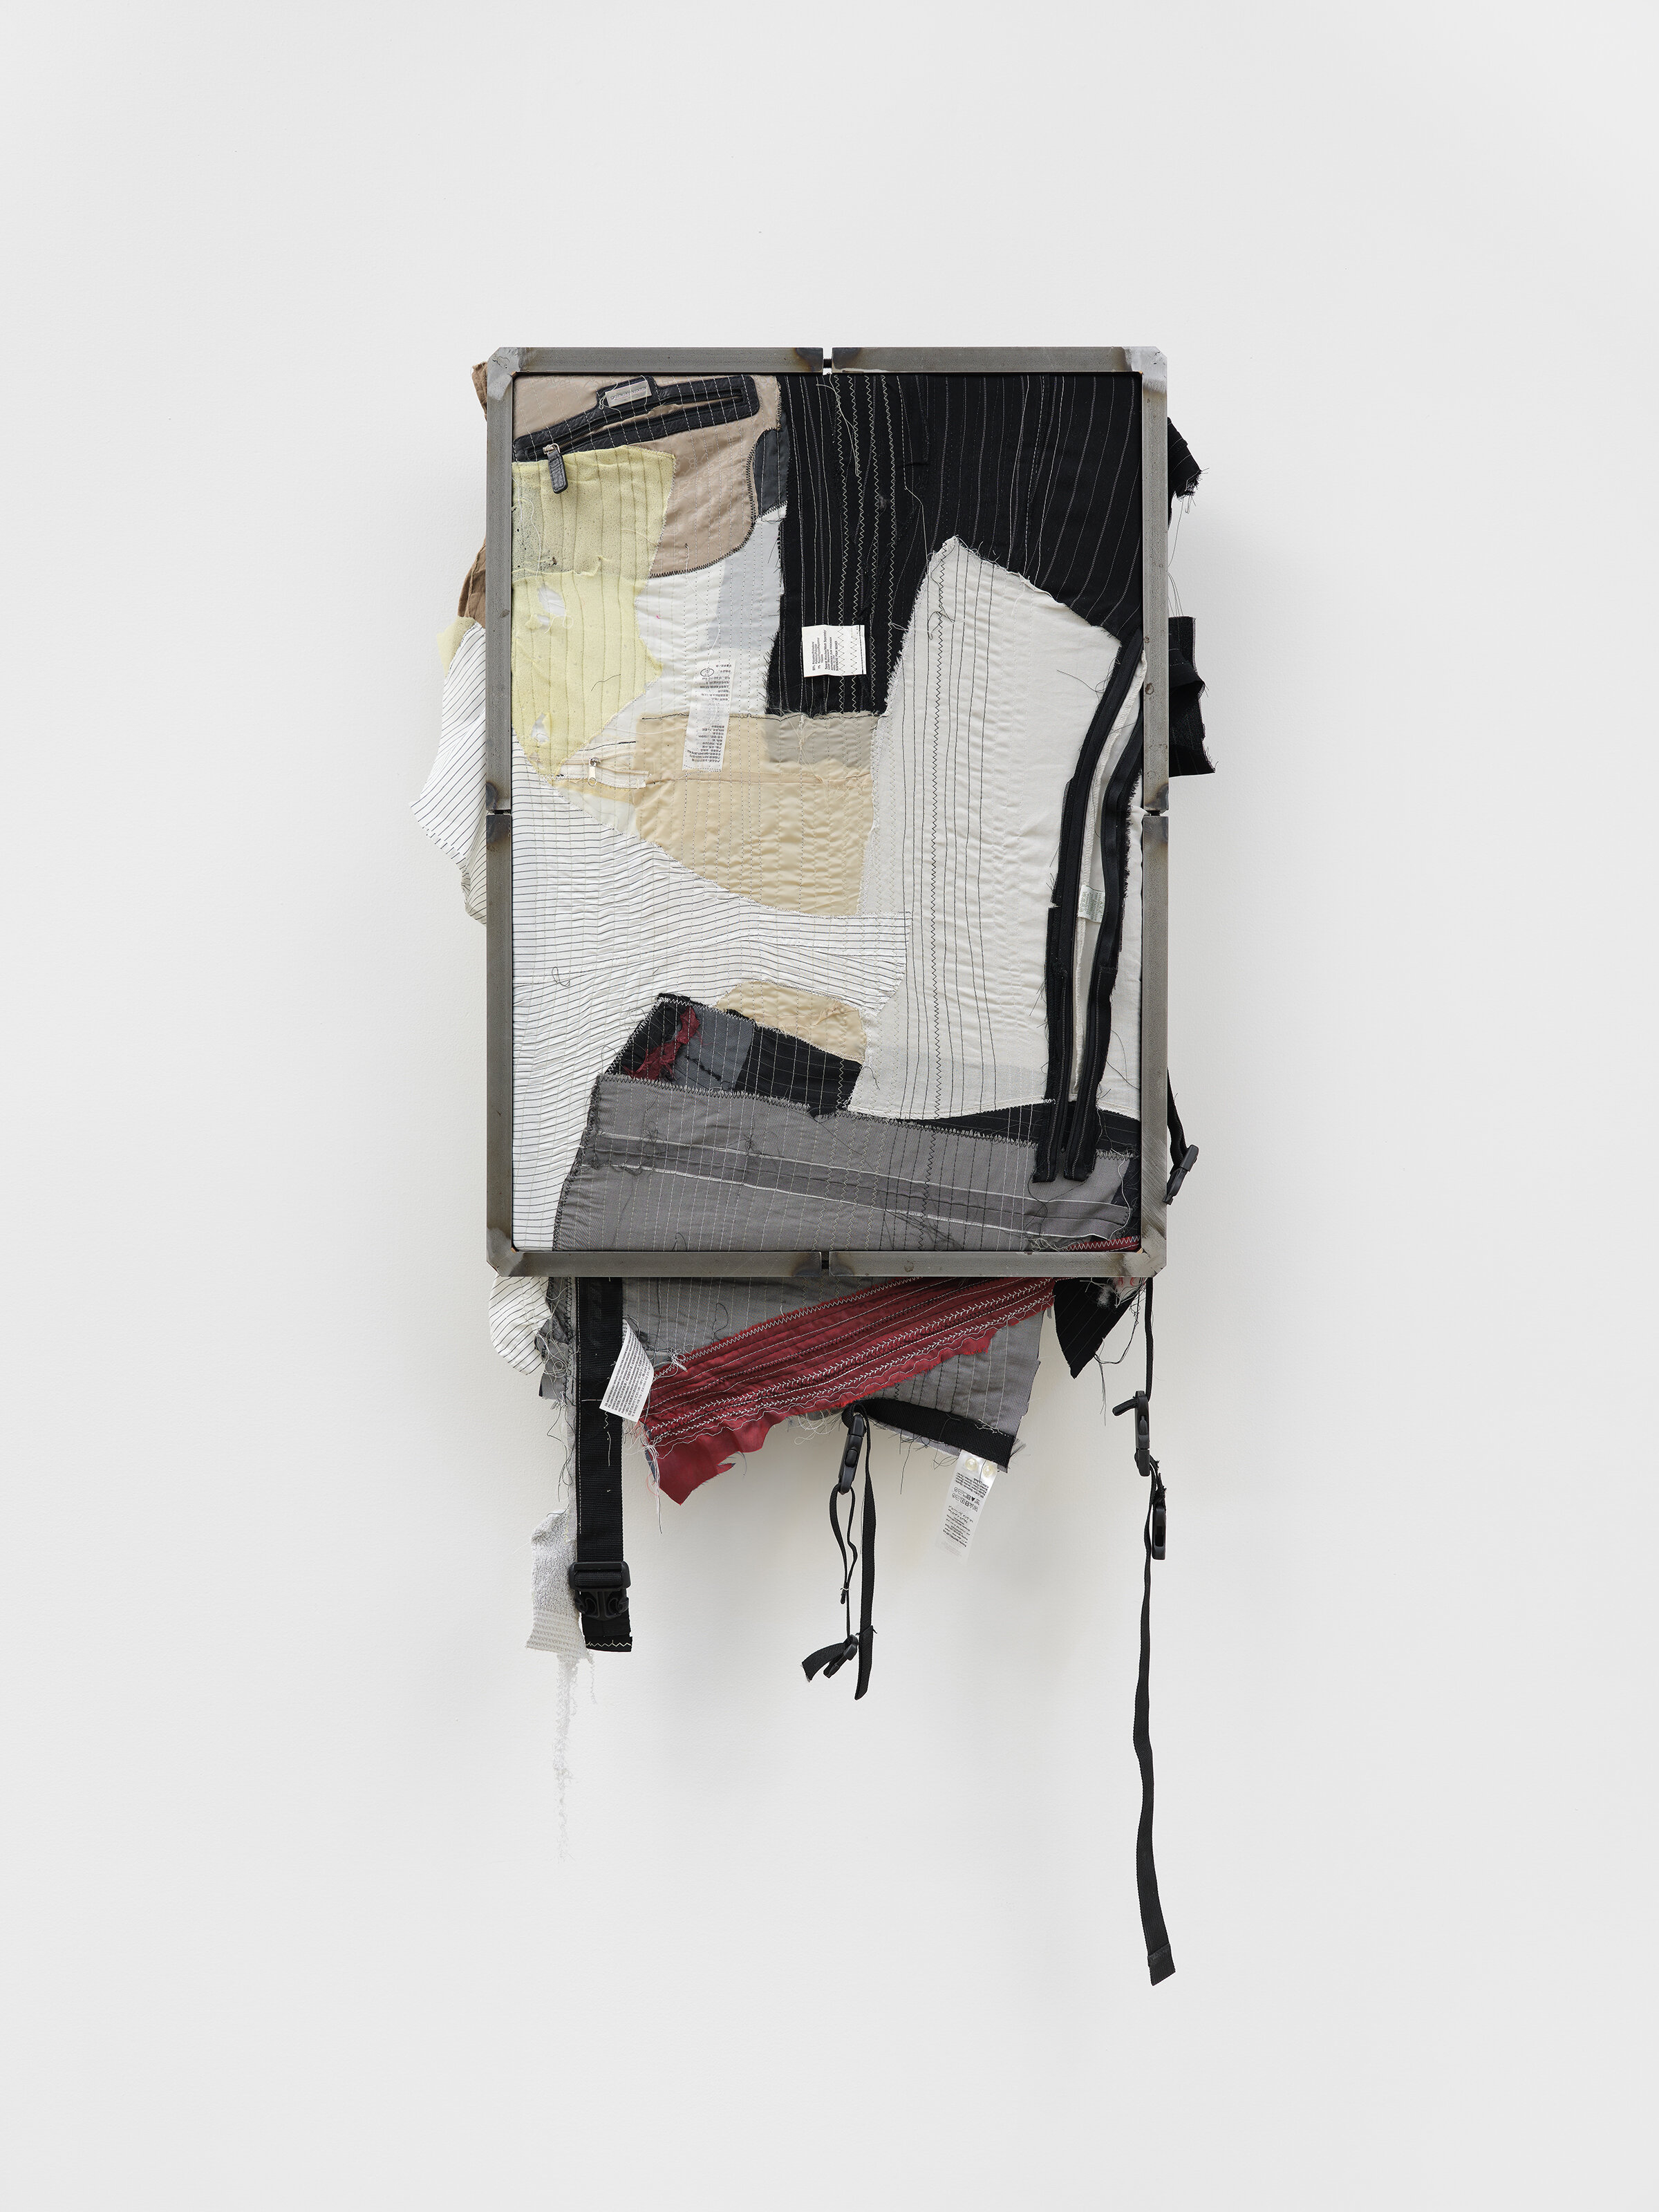  Tenant of Culture  Grip and Stitch , 2020 Steel, recycled hand bag linings, miscellaneous recycled garment pieces, thread, padding  29 x 21.5 x 5 in (74 x 54 x 12 cm) 